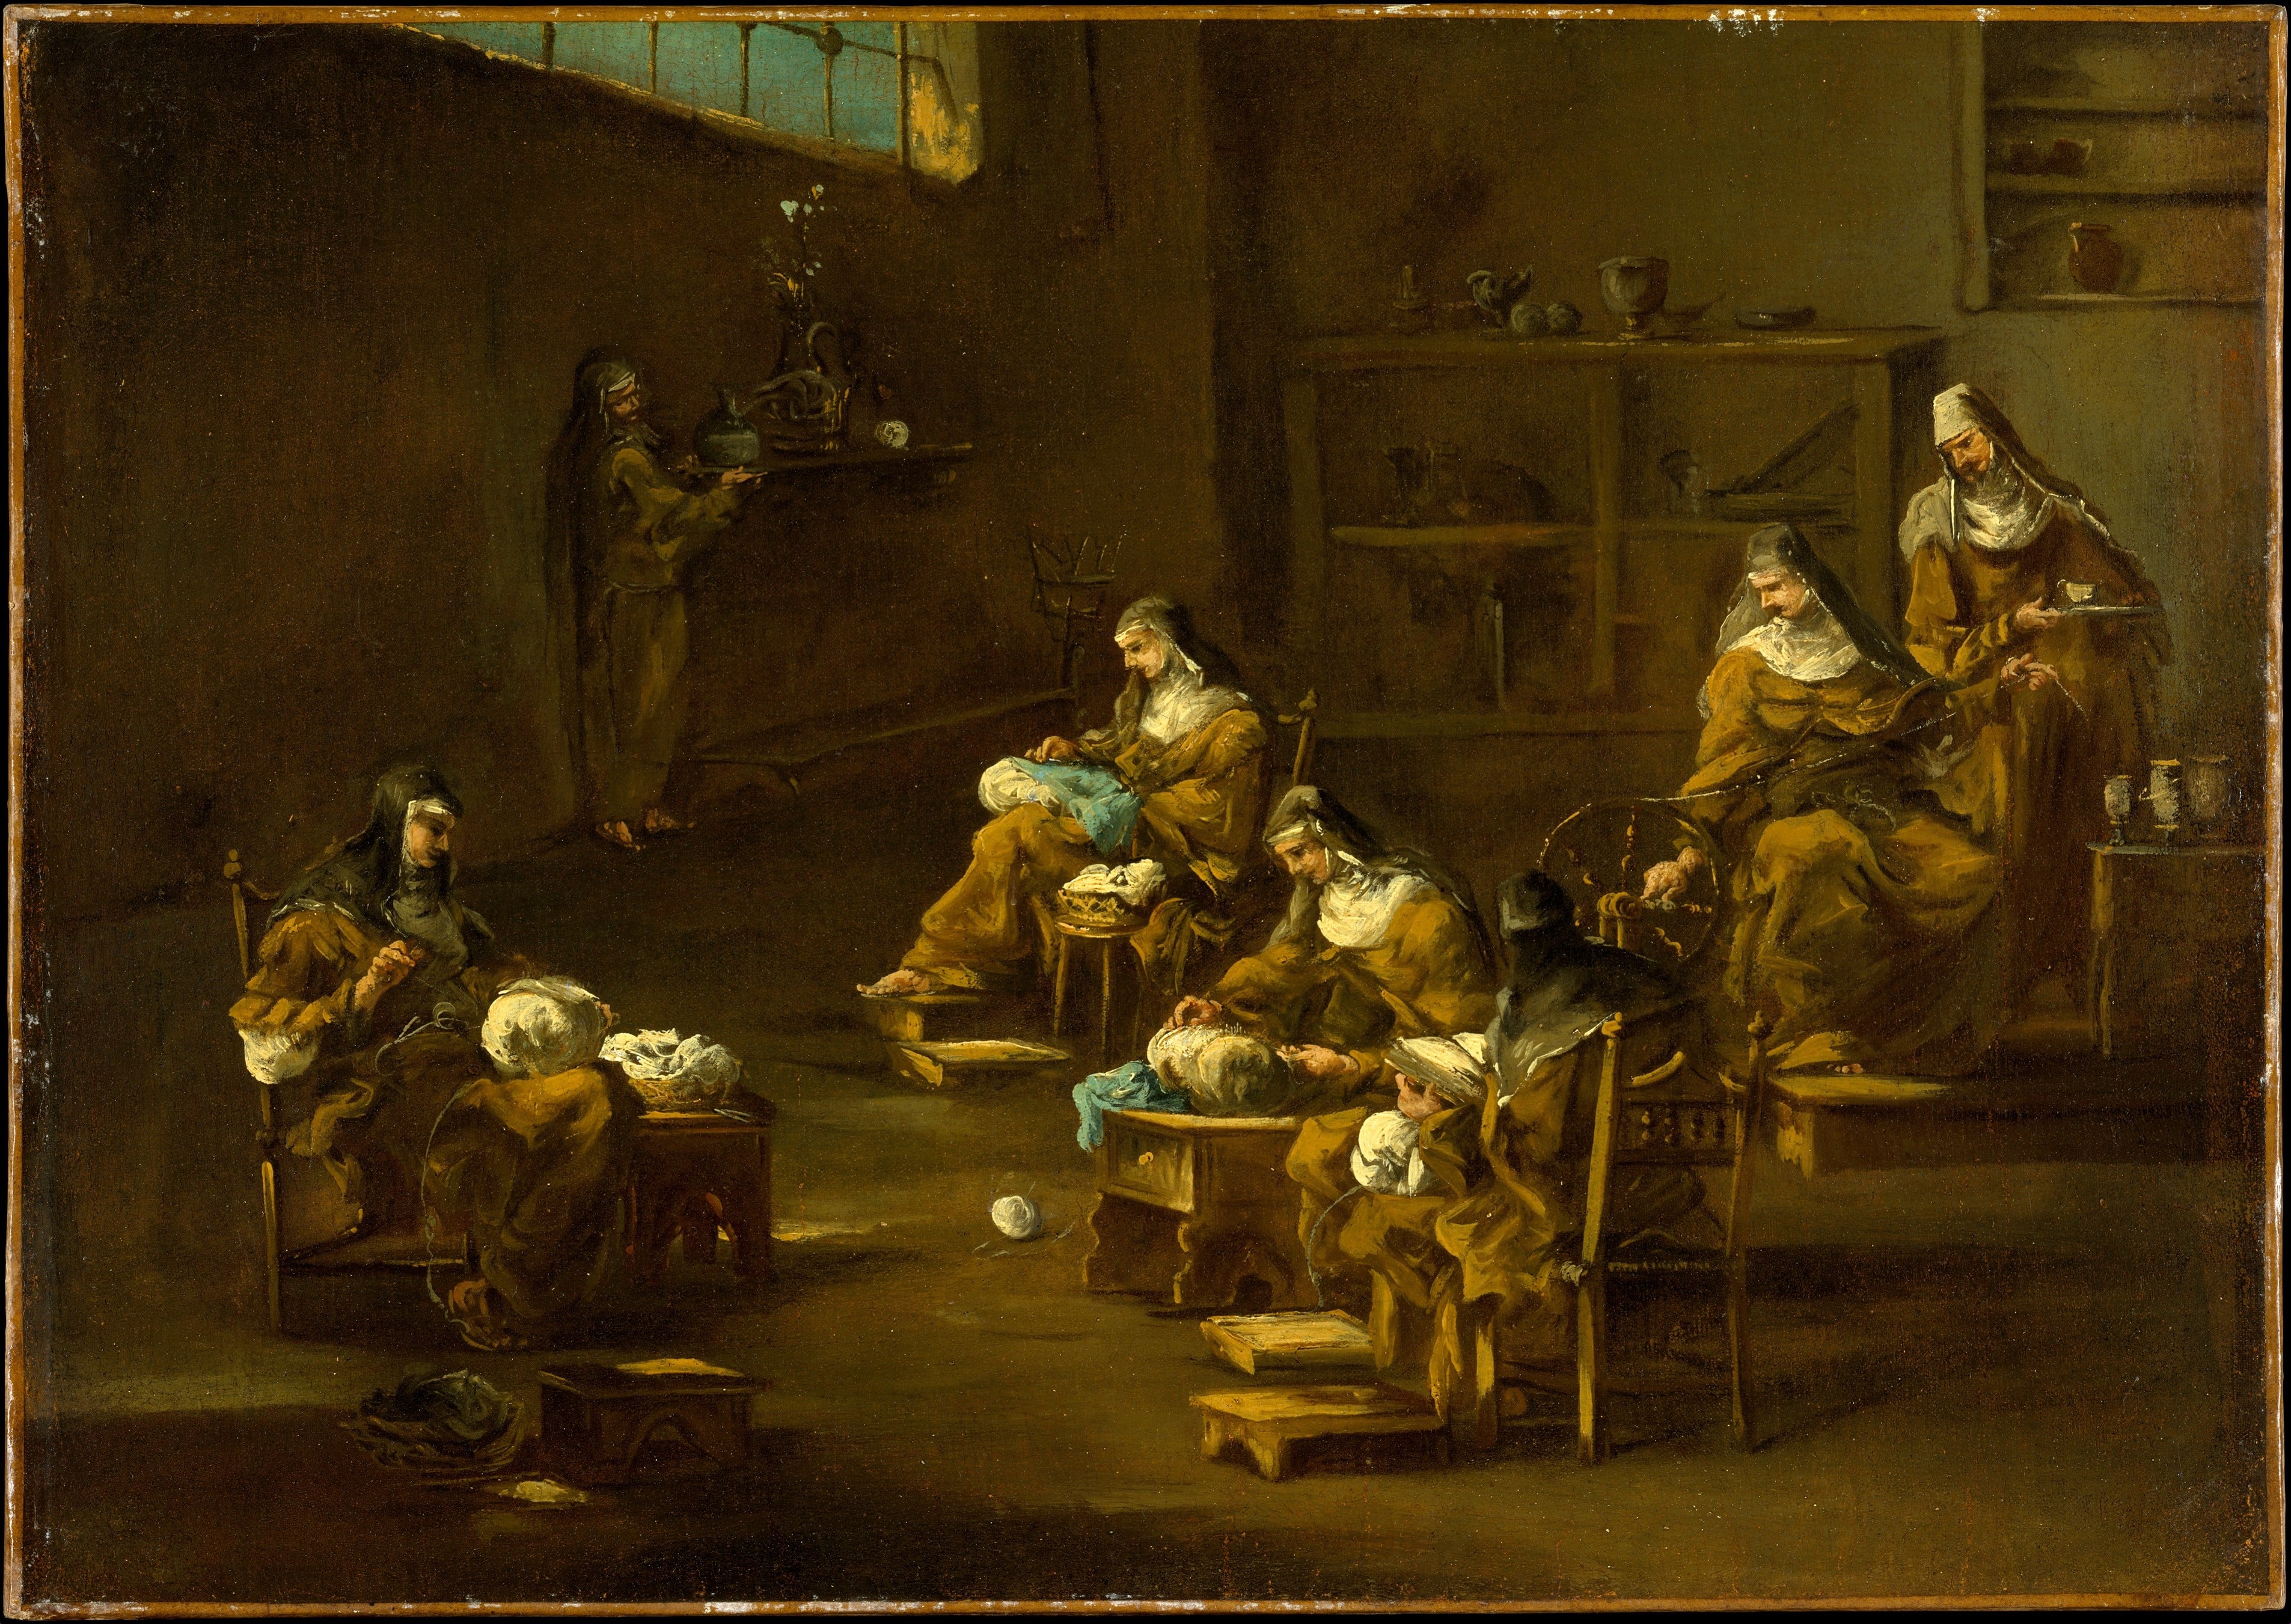 Nuns at work painting by a follower of Alessandro Magnasco